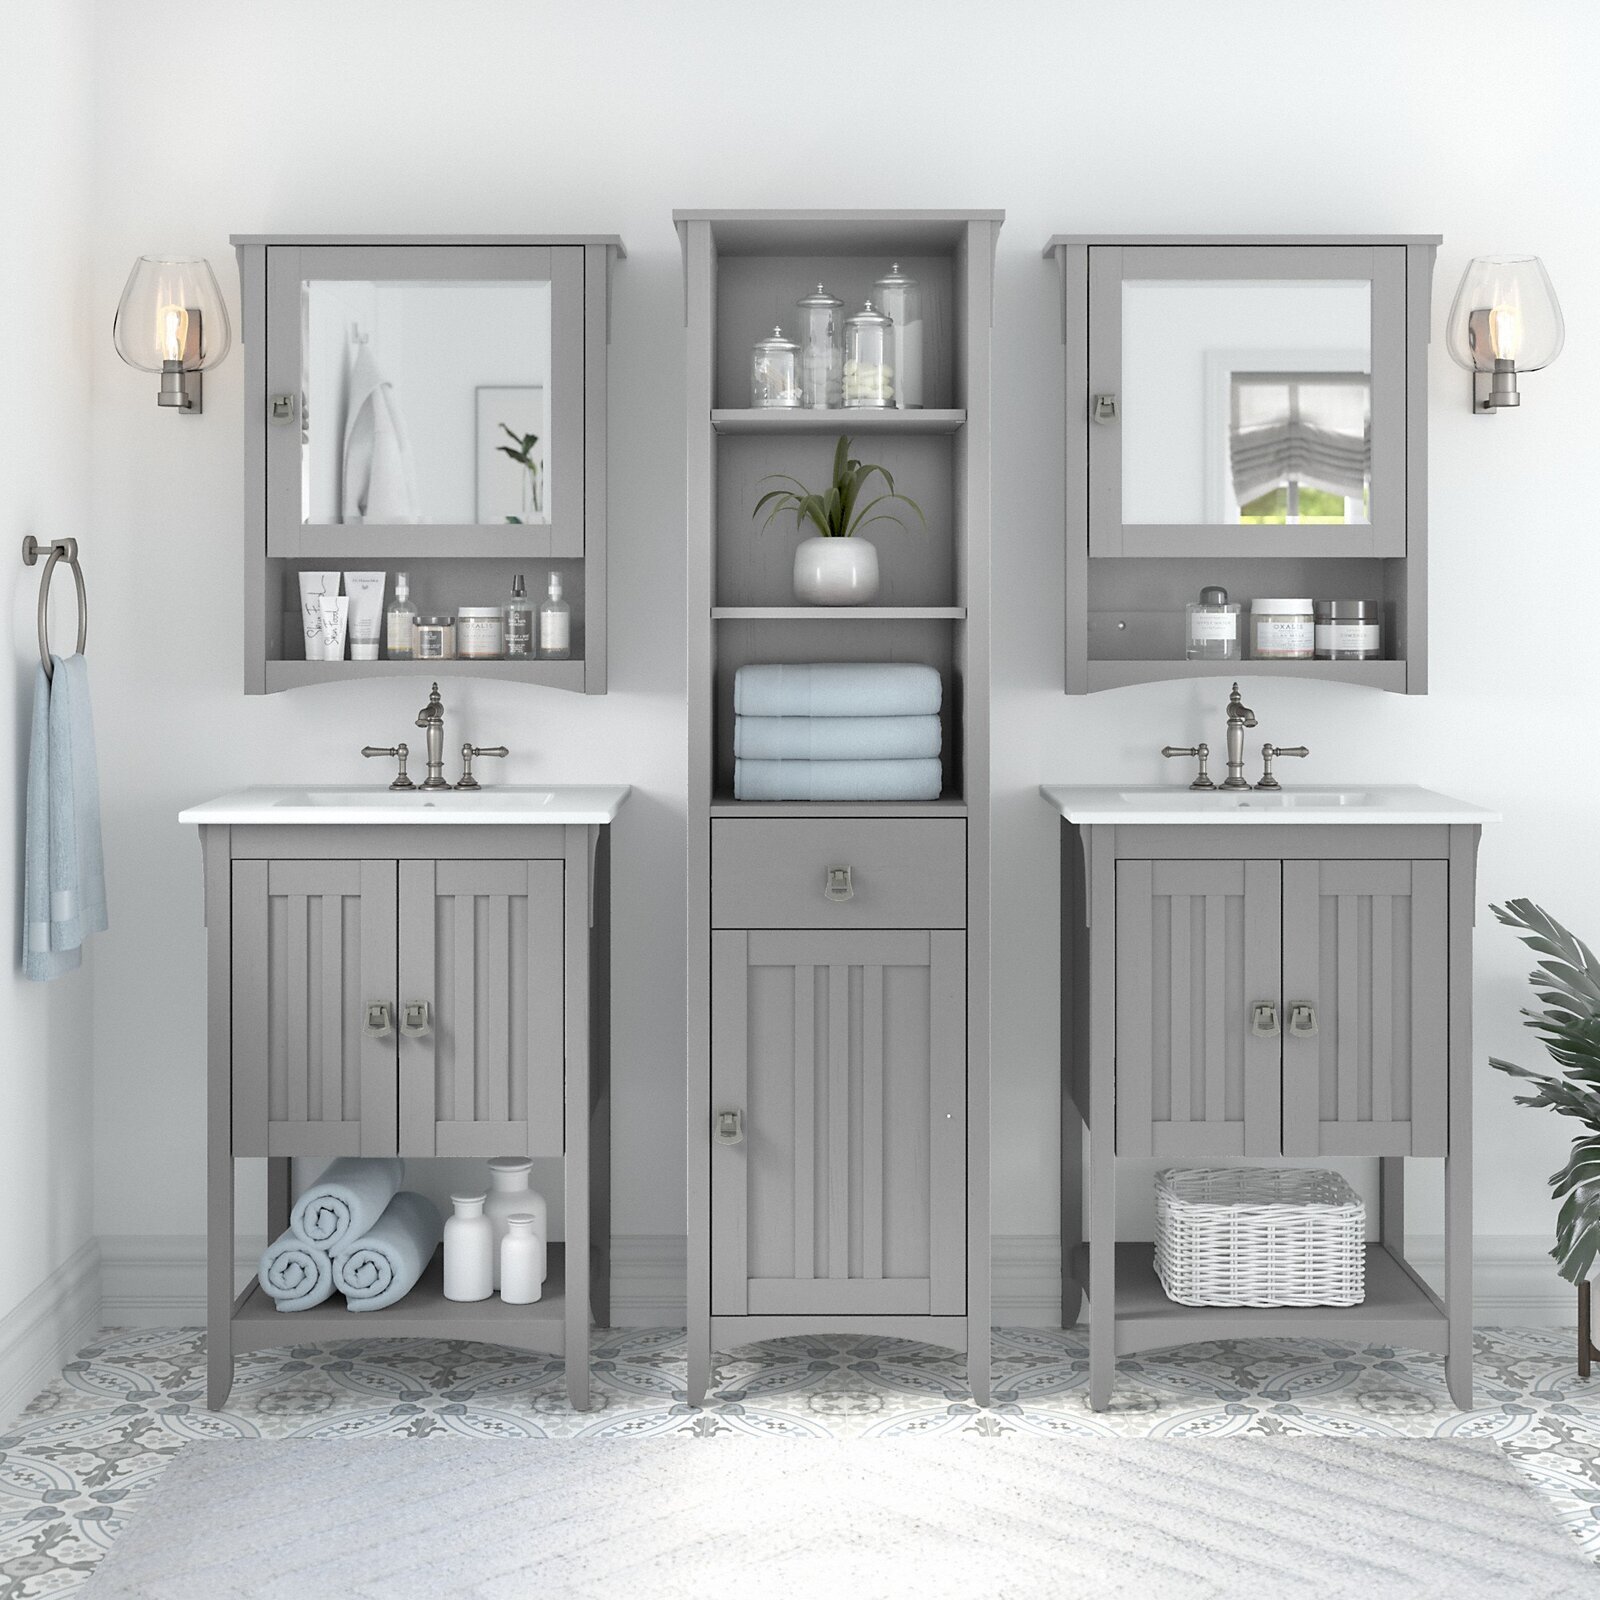 Bathroom vanity with matching linen cabinets